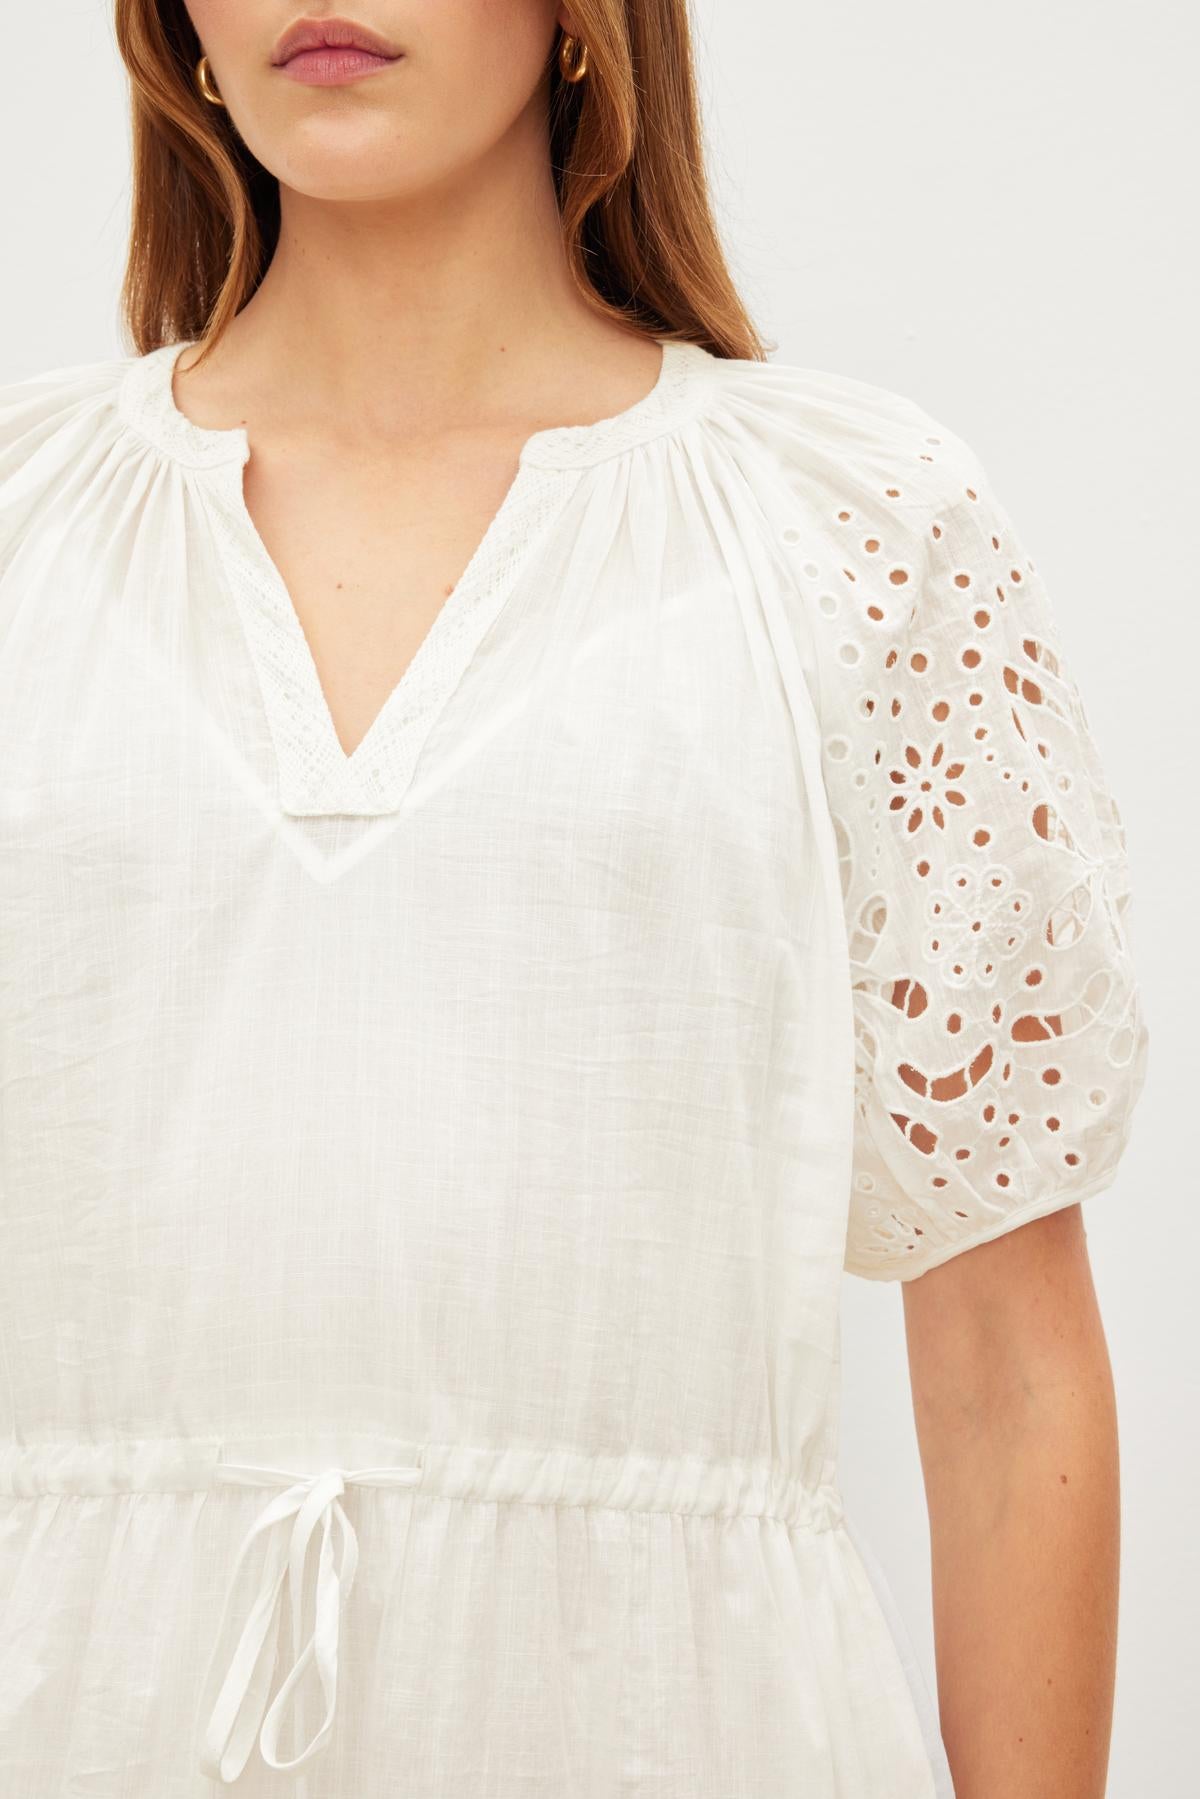   Woman wearing a white NADIA EMBROIDERED COTTON LACE DRESS by Velvet by Graham & Spencer with v-neckline and perforated sleeves, cropped to show from the neck to waist. 